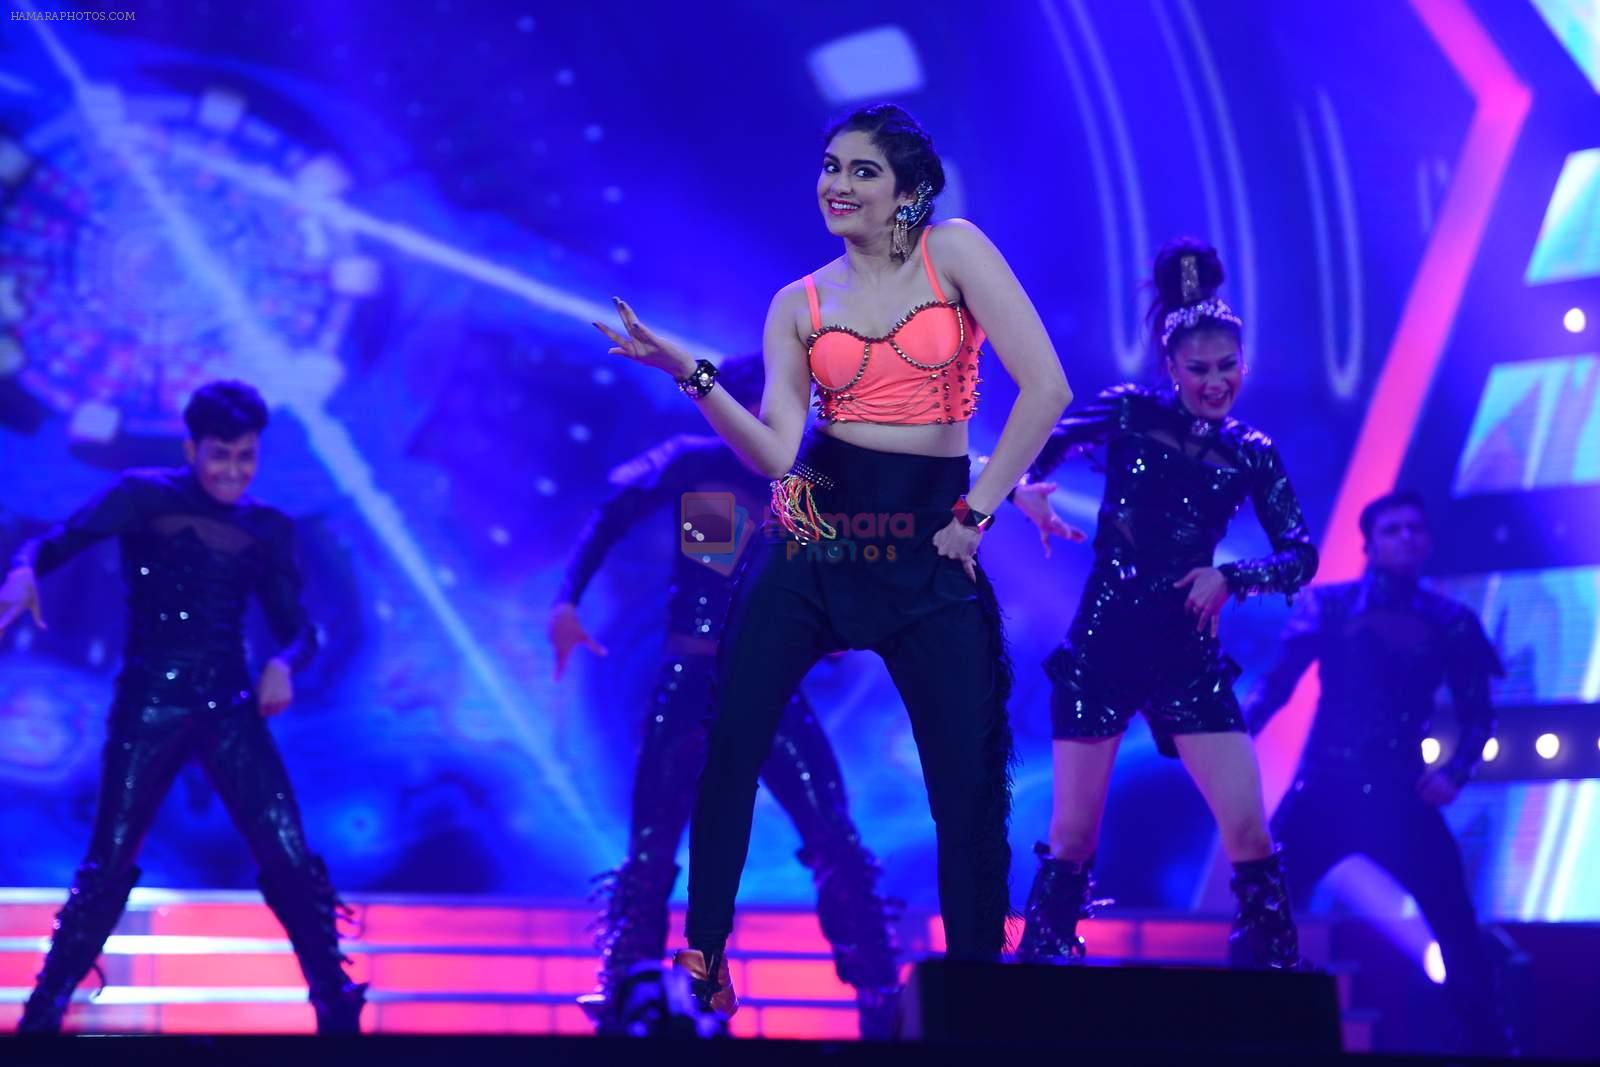 Adah Sharma at Micromax SIIMA AWARDS 2015 RED CARPET DAY2 on 6th Aug 2015